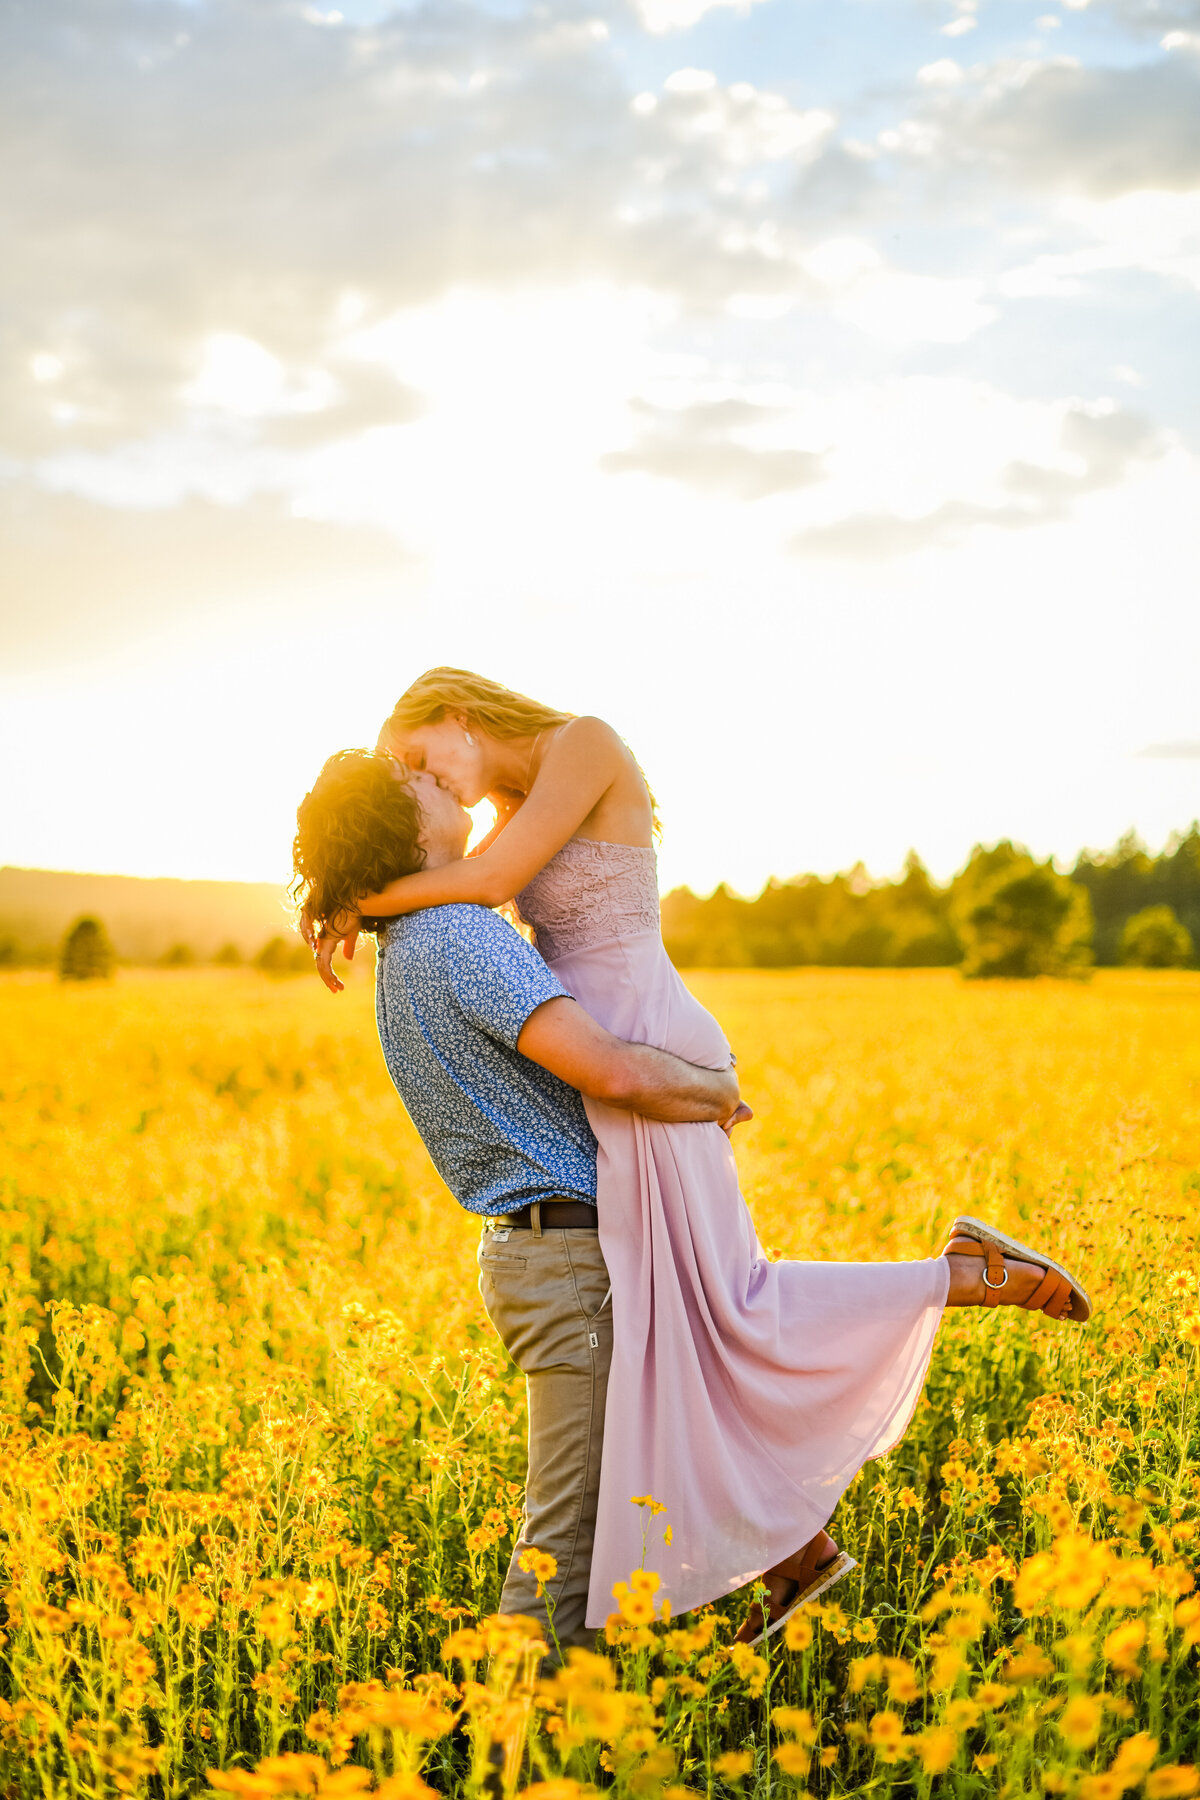 Couple engaged holding her up kissing sunset golden hour wildflowers yellow sunflowers Flagstaff Arizona